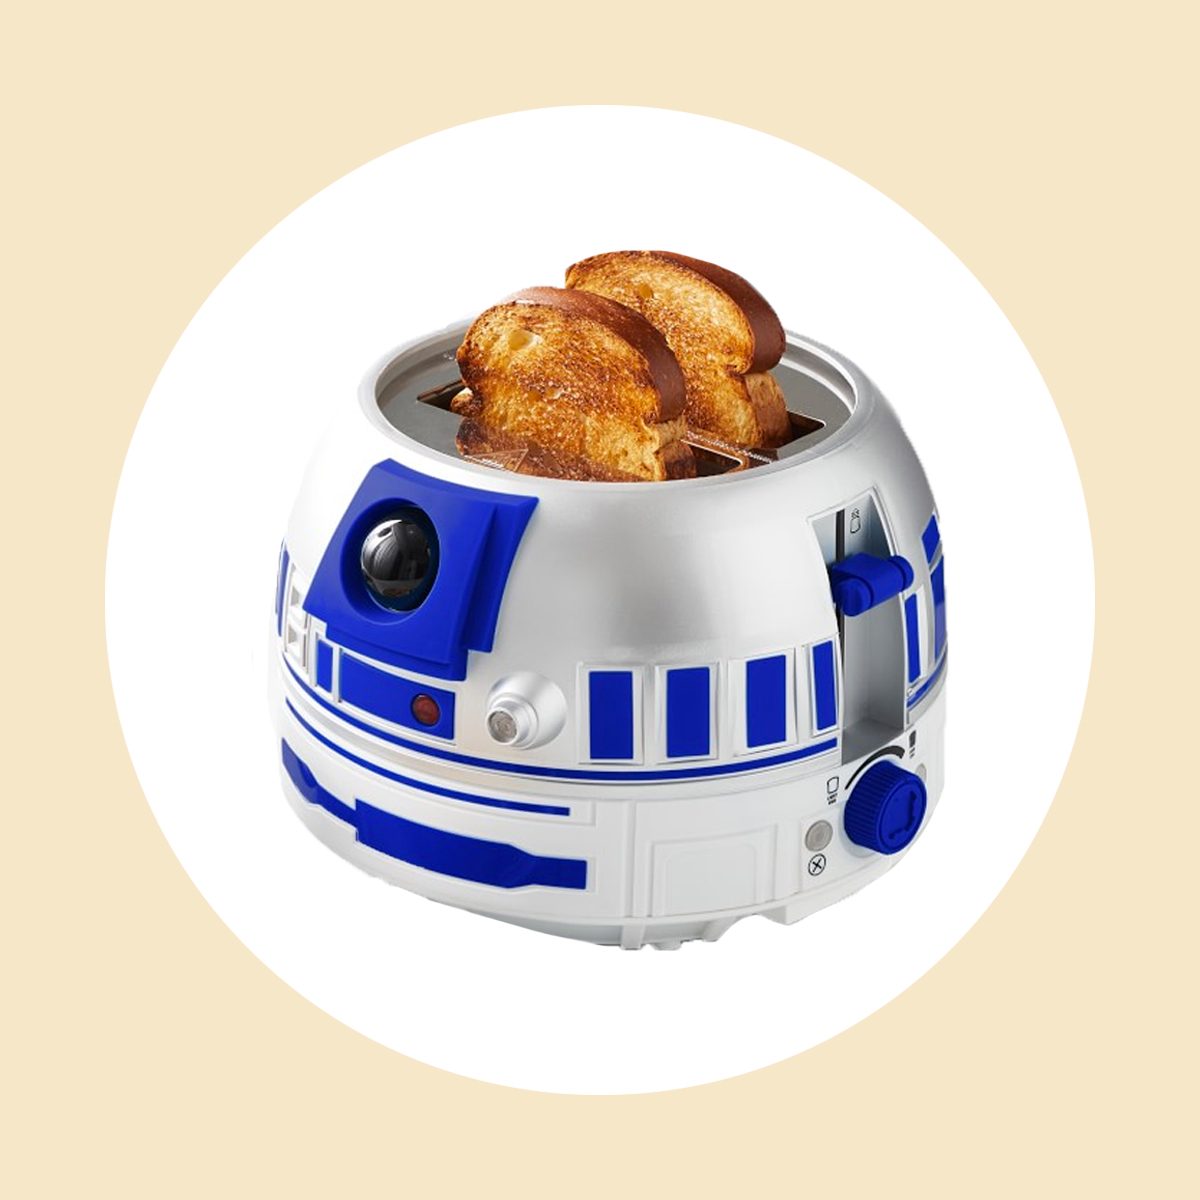 10 Cool Star Wars Kitchen Products to Awaken the Geek Inside You - Design  Swan